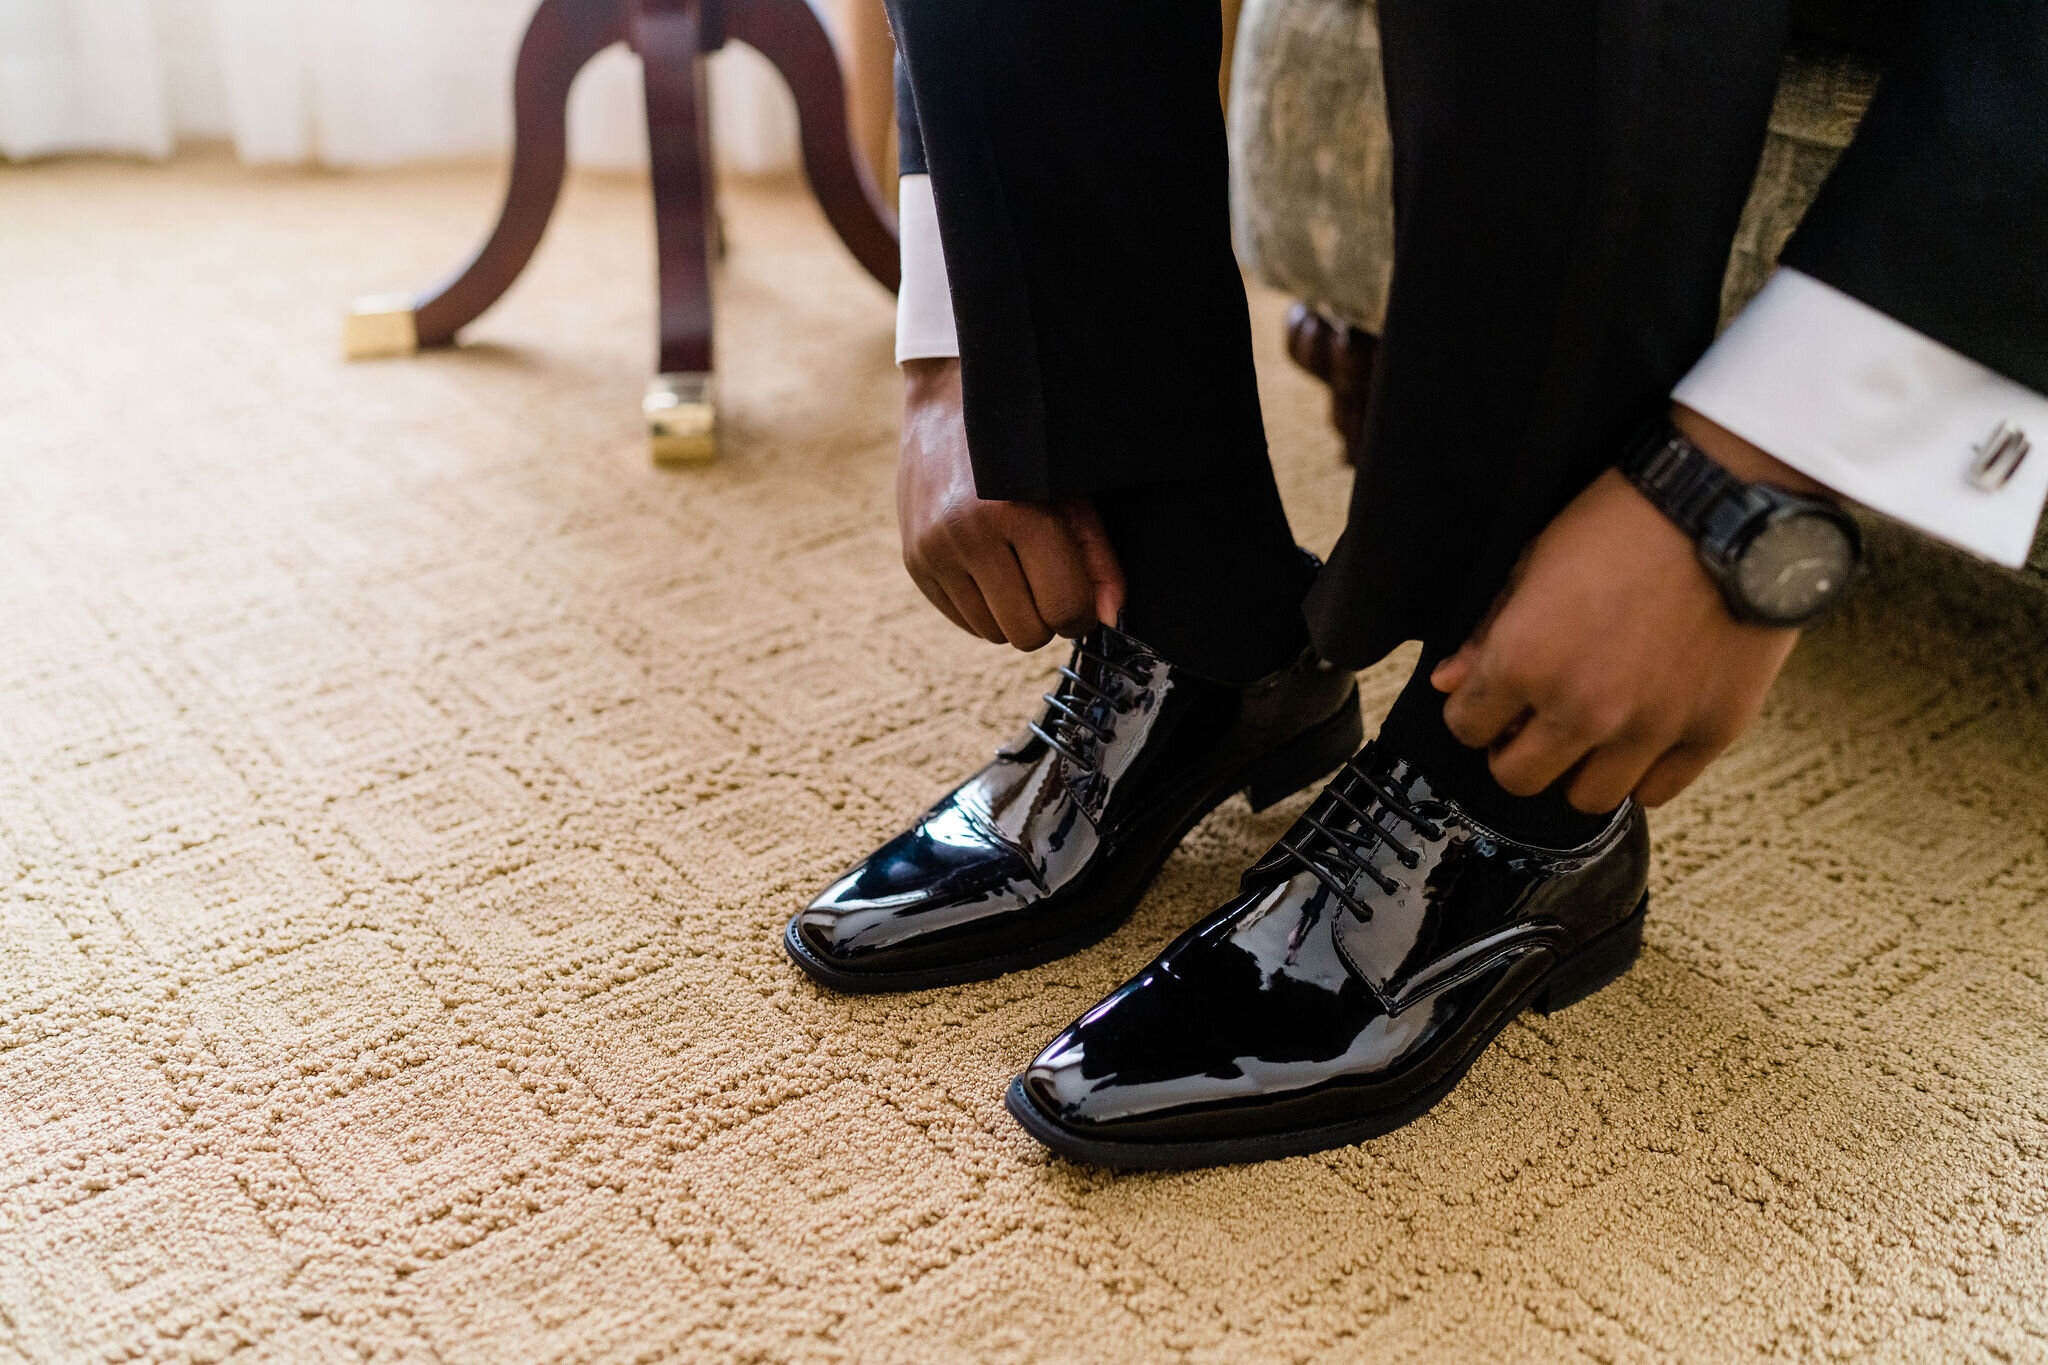 Groom putting his shoes on